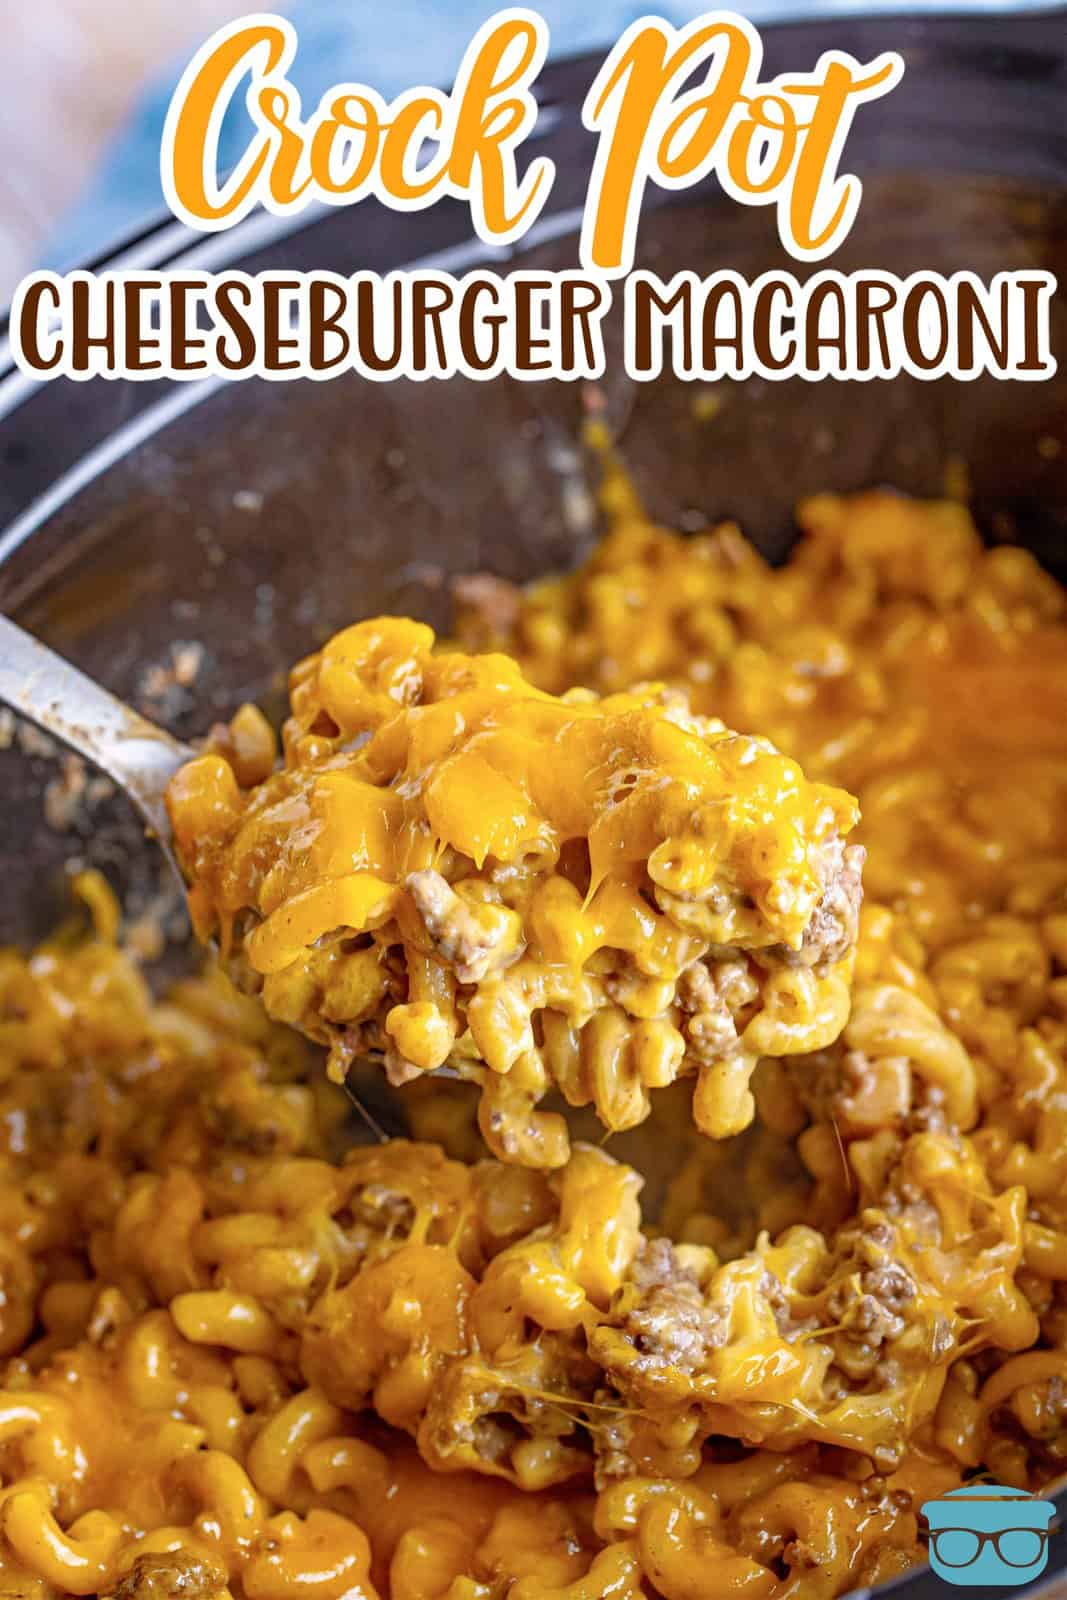 A serving utensil scooping a serving of Cheeseburger Macaroni.